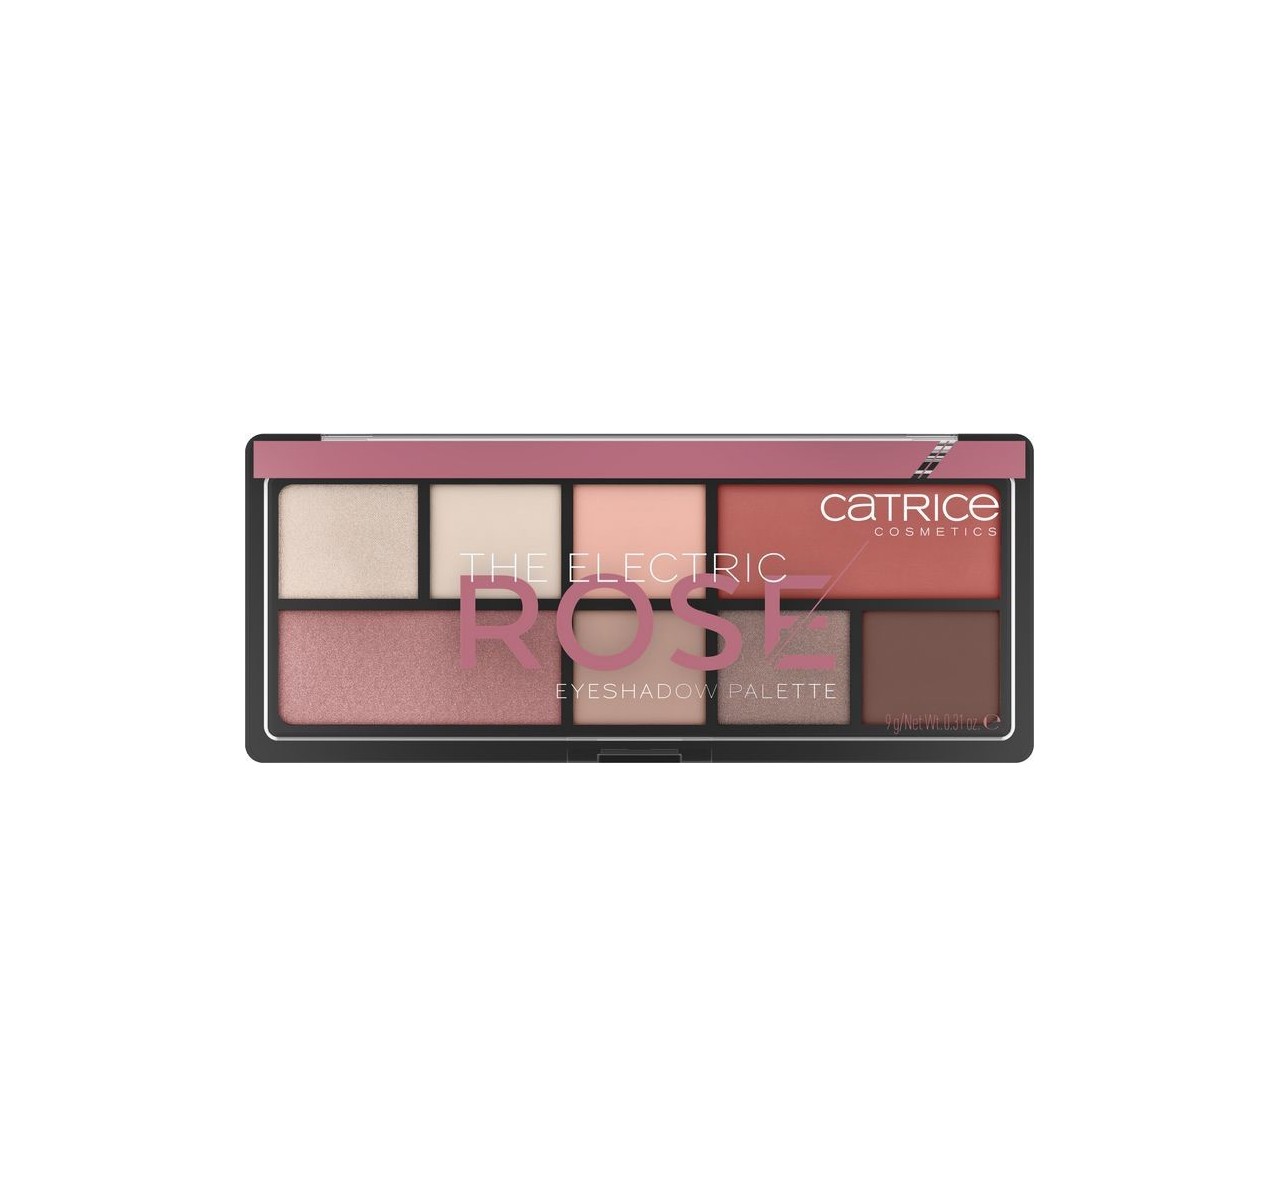 Catrice's The Electric Rose Eyeshadow